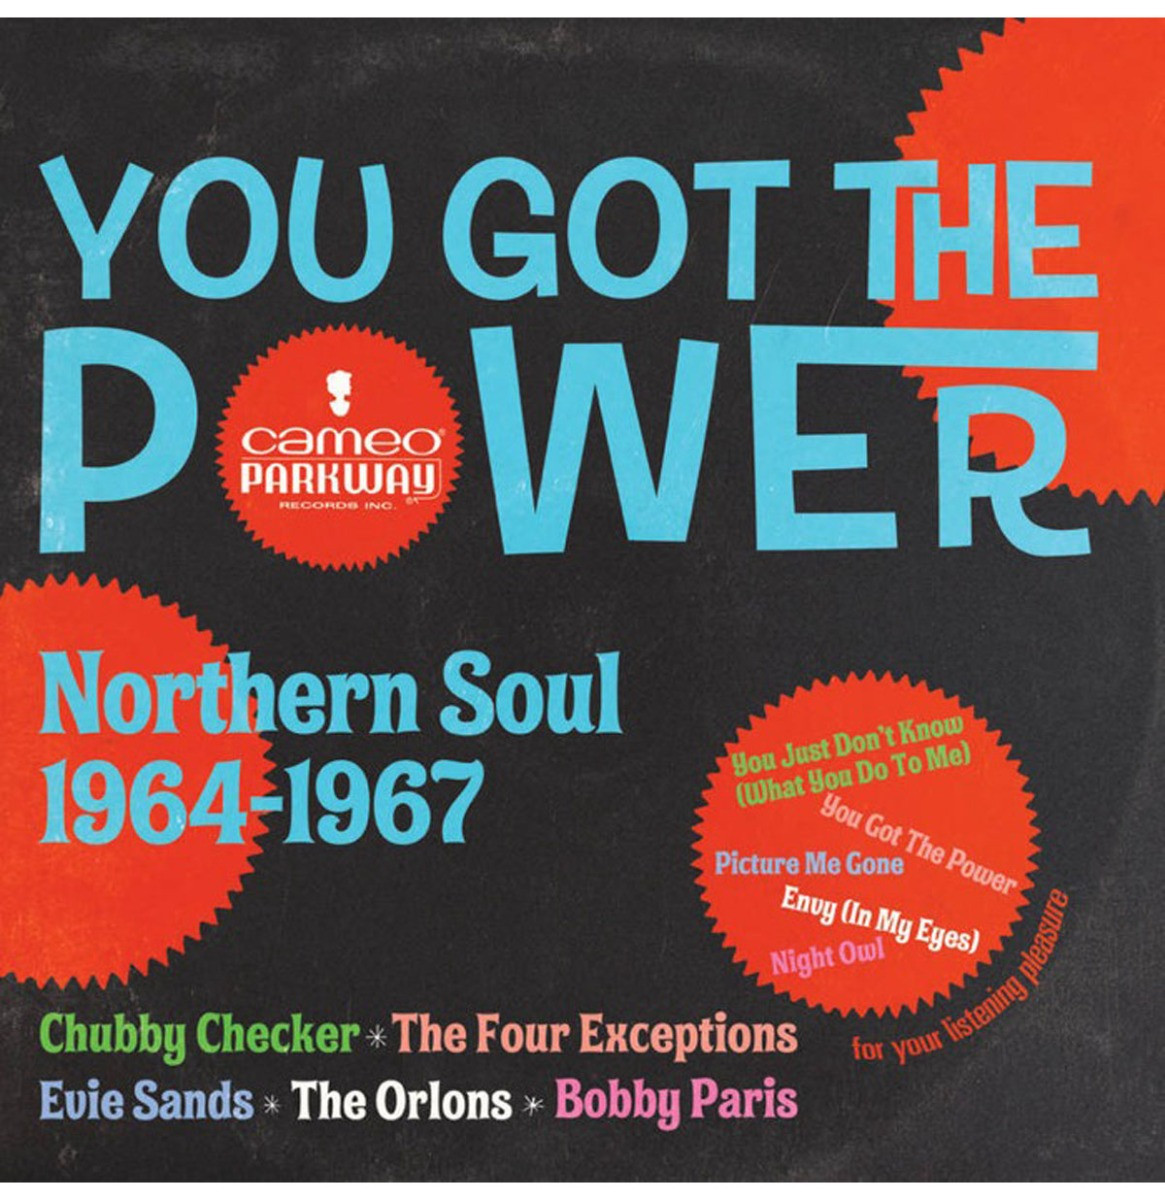 Various Artists - You Got The Power (Northern Soul 1964-1967) (Record Store Day Black Friday 2021) 2LP